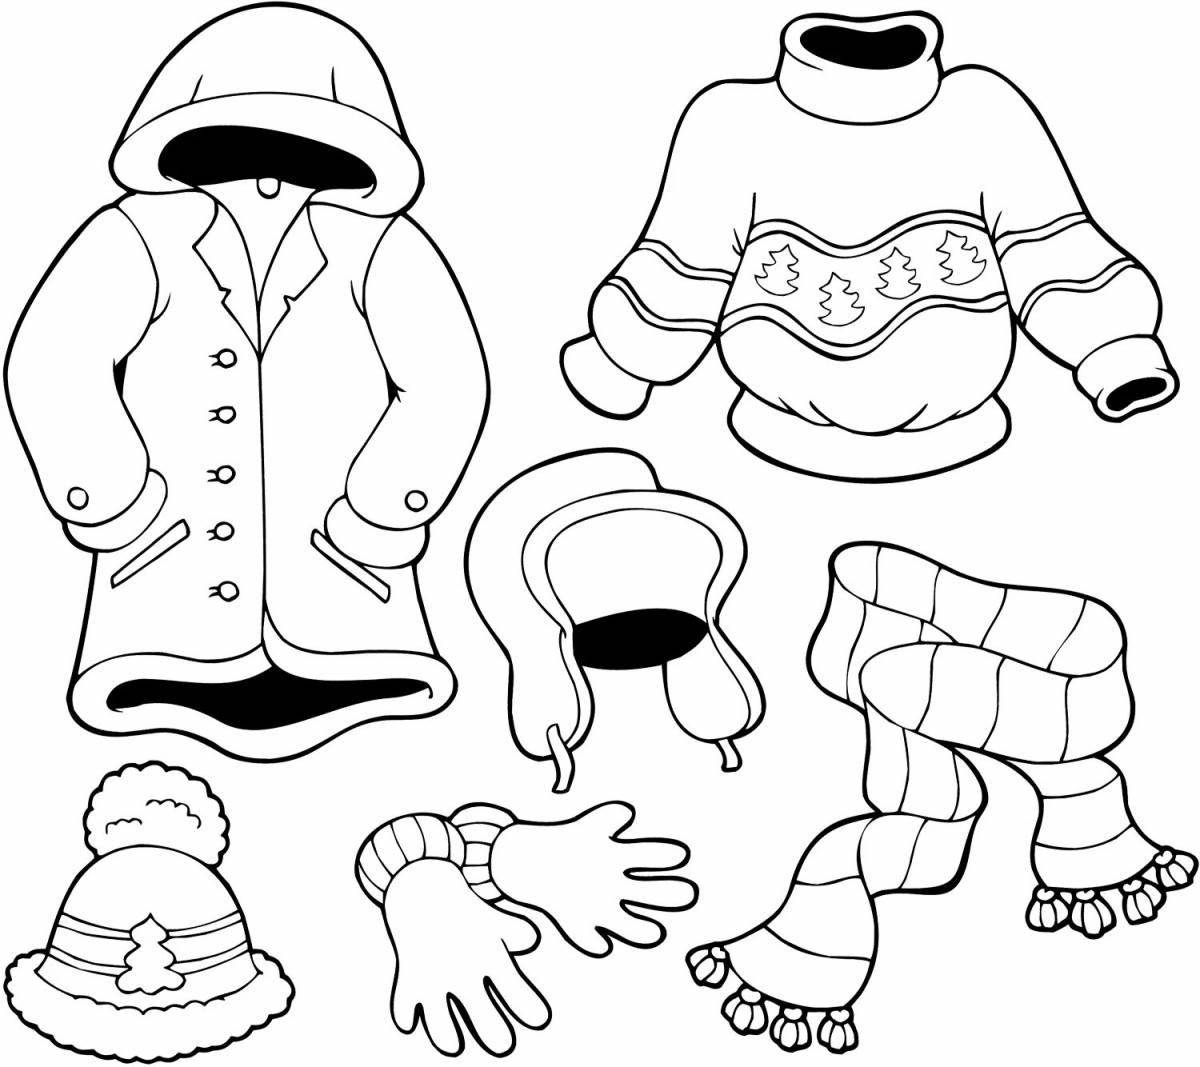 Coloring page fashionable summer clothes for kids